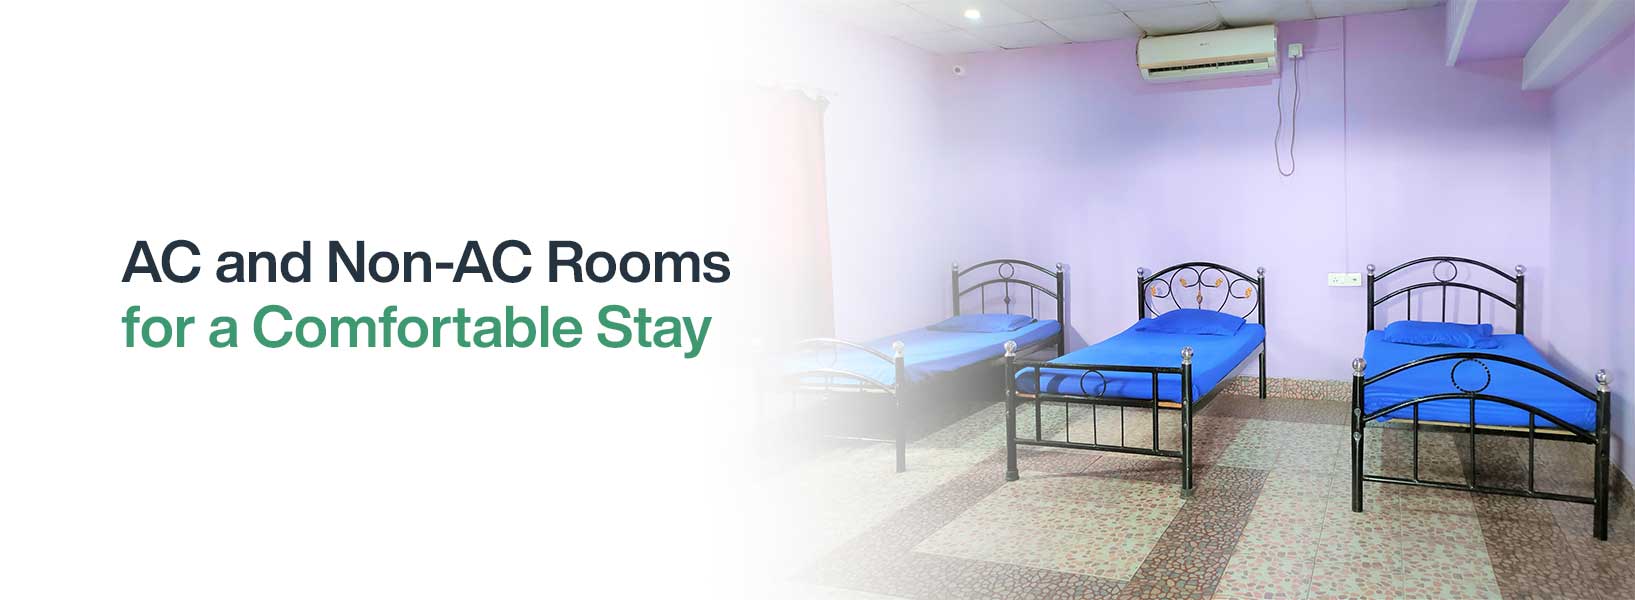 AC and Non-AC Rooms for a Comfortable Stay